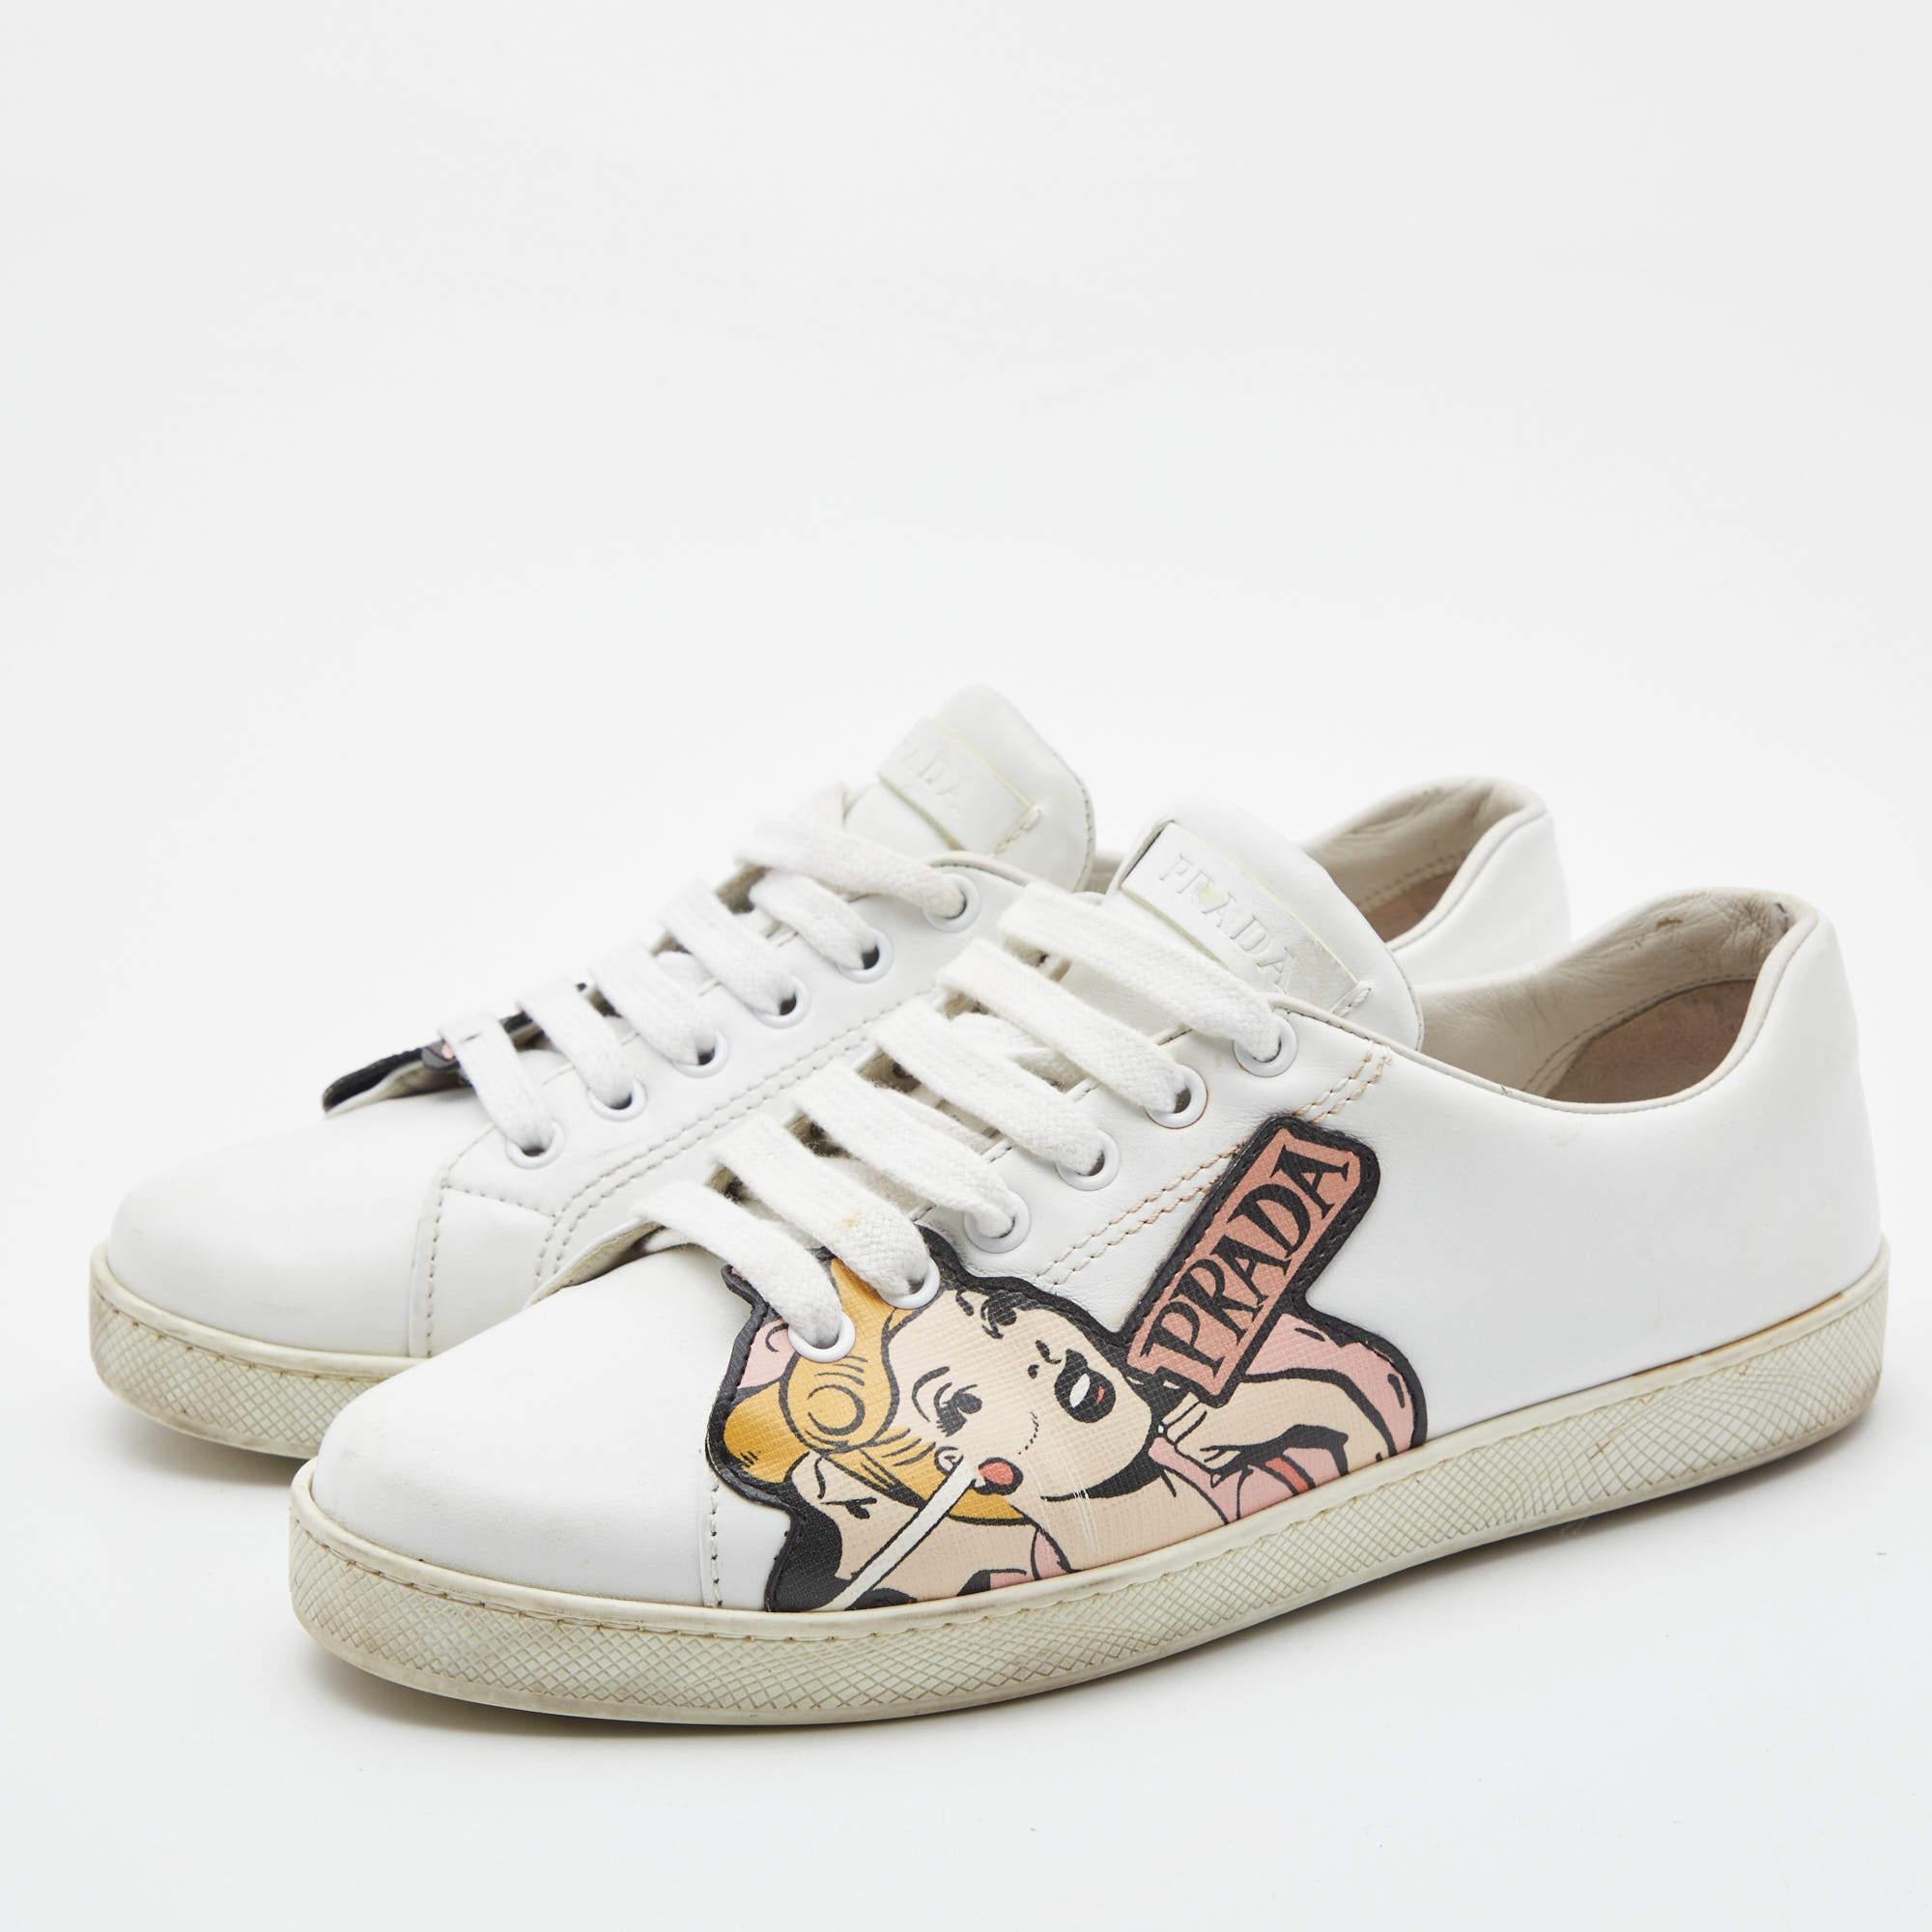 Let this comfortable pair be your first choice when you're out for a long day. These Prada white sneakers have well-sewn uppers beautifully set on durable soles.

